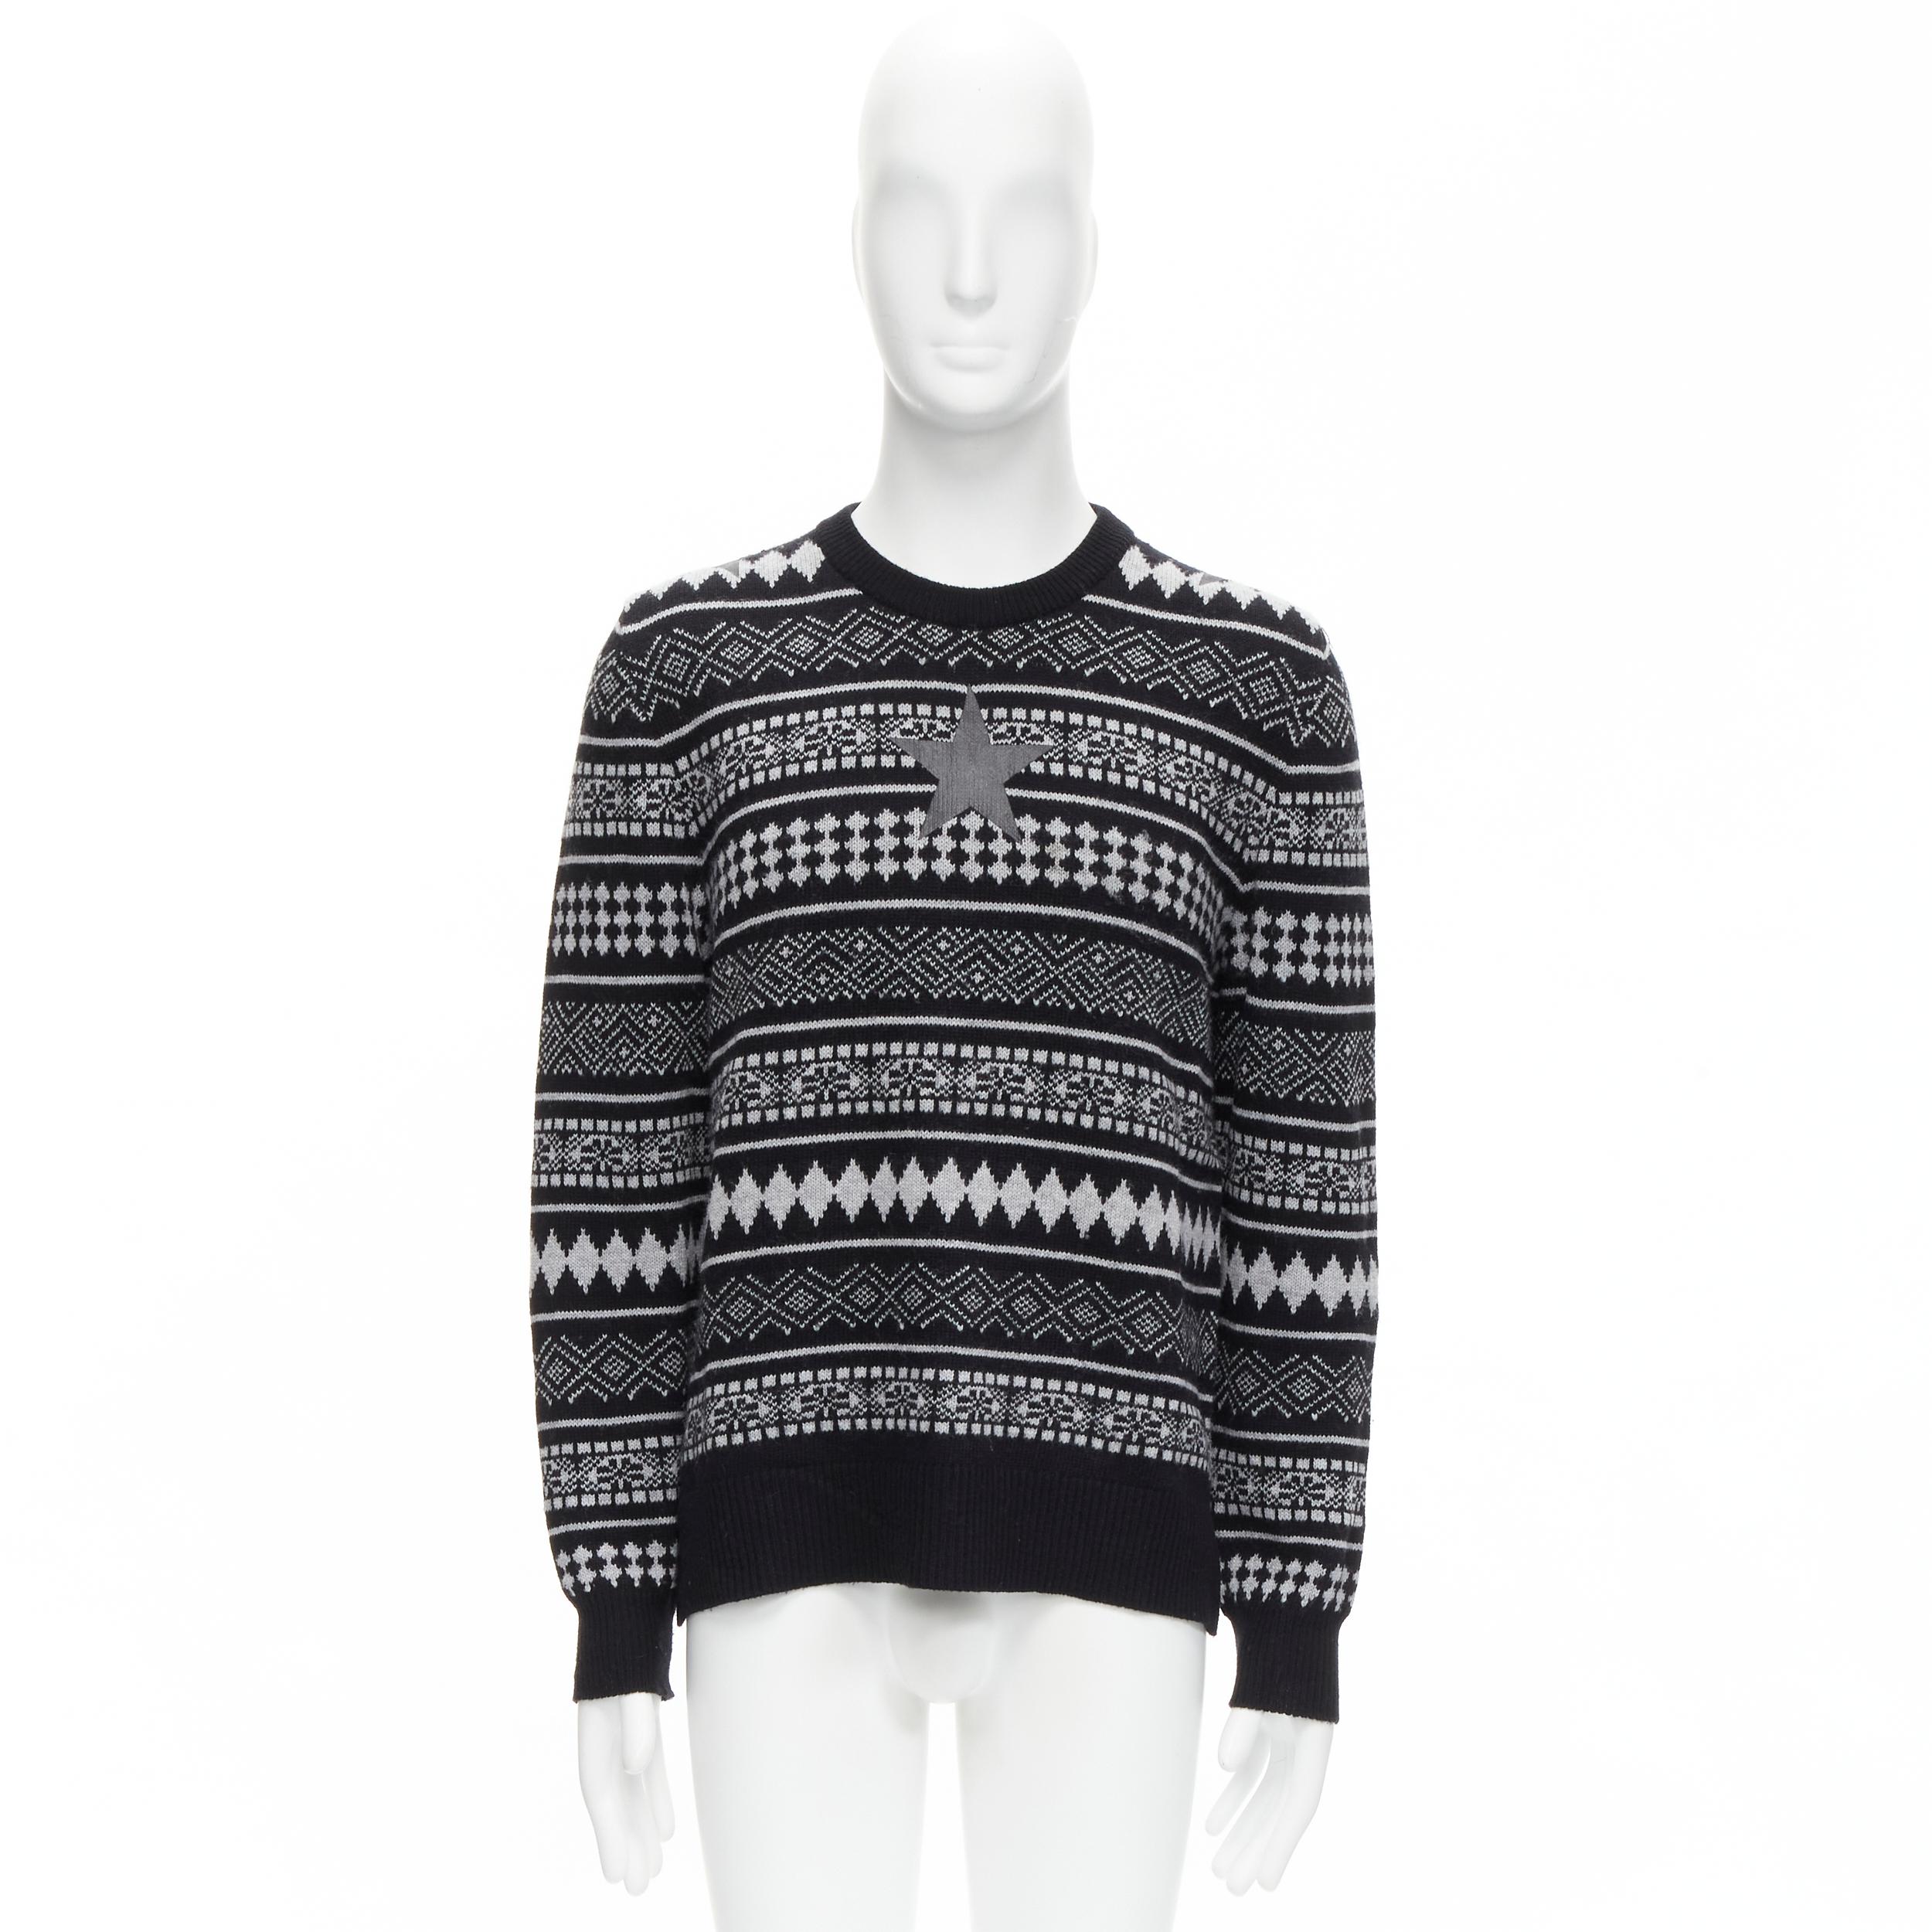 GIVENCHY Riccardo Tisci textured star stripes intarsia pullover sweater M For Sale 4